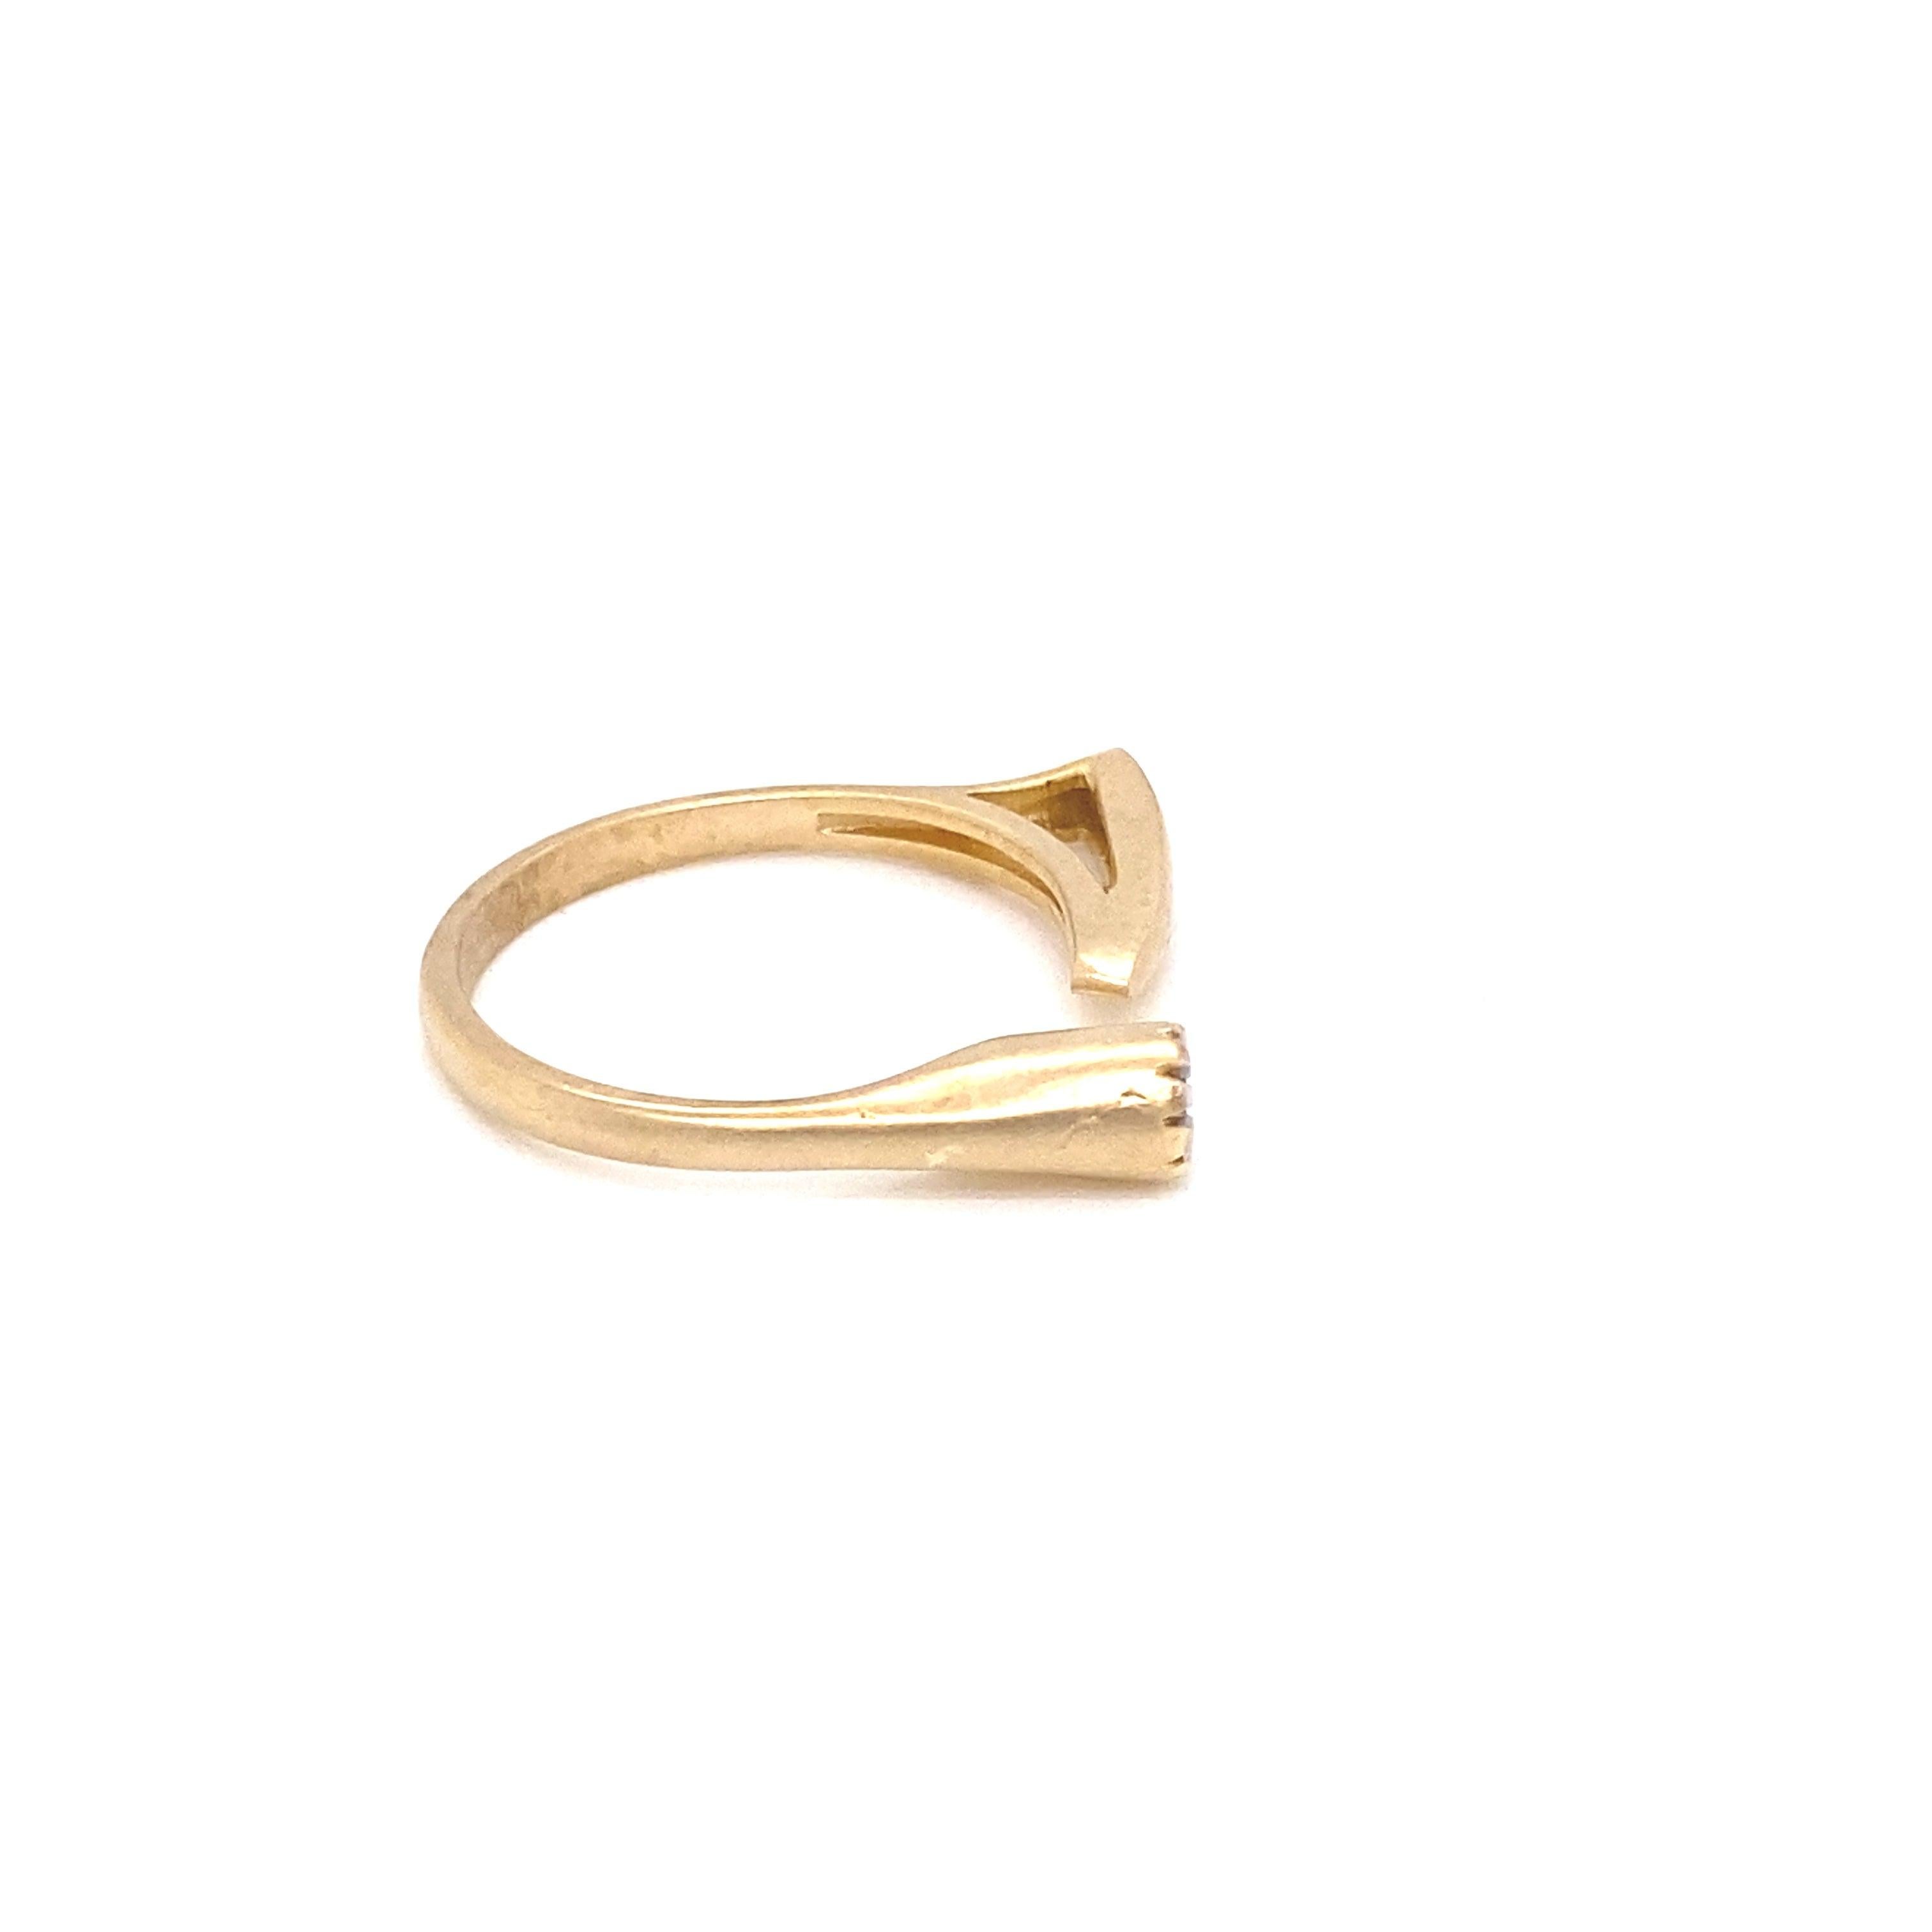 For Sale:  Handcrafted 14 Karat Yellow Gold Gap Ring 4